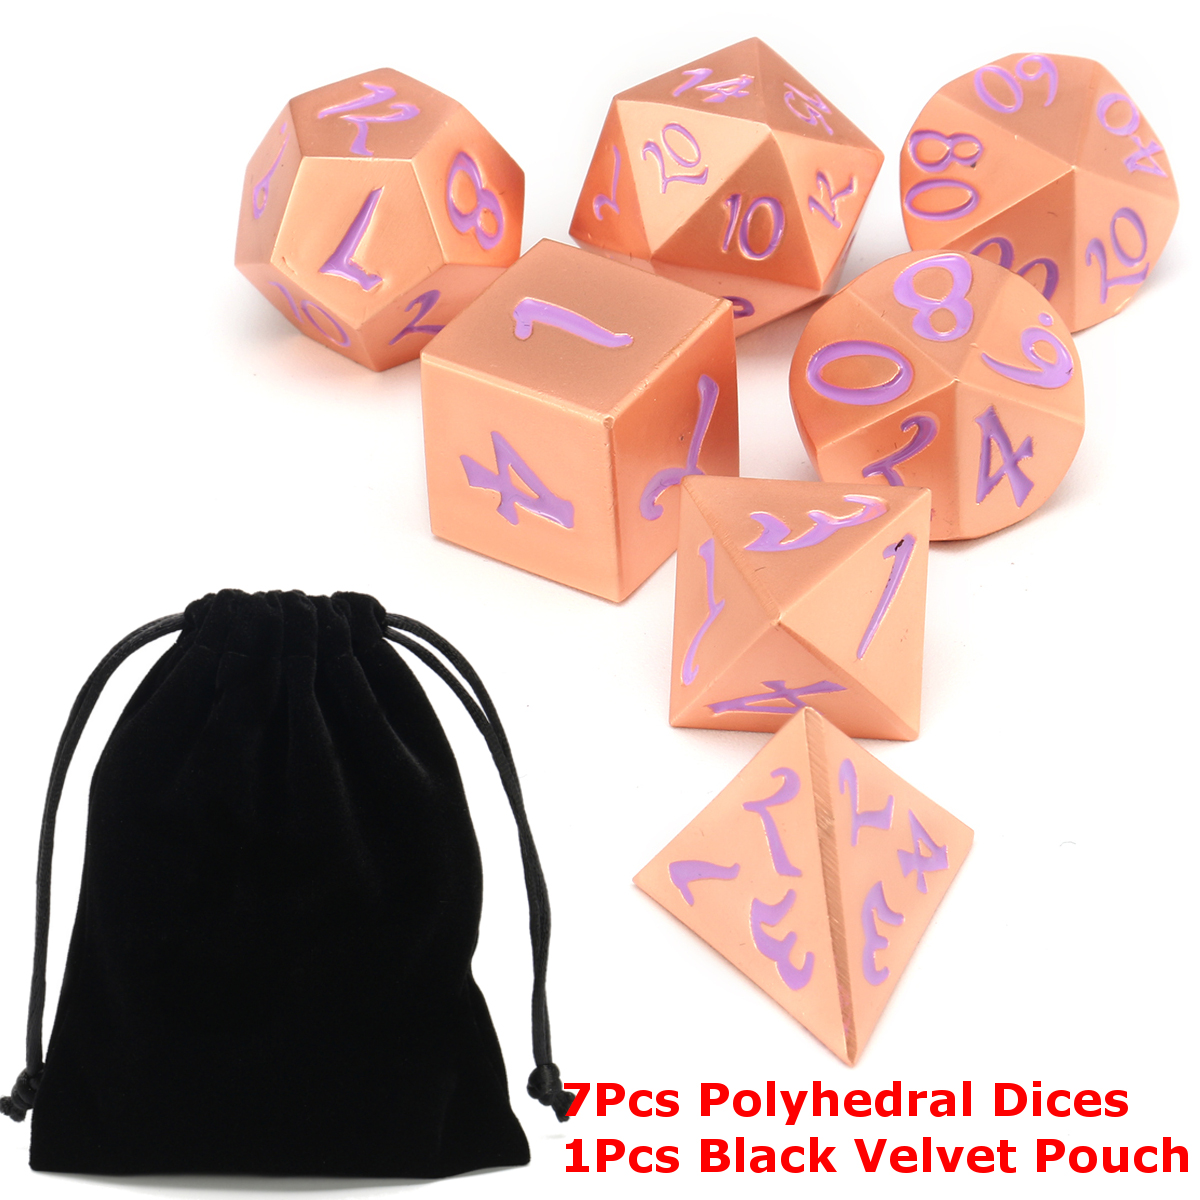 7Pcs-Antique-Metal-Polyhedral-Dice-Role-Playing-Game-Dices-Heavy-Duty-With-Bag-1320392-2